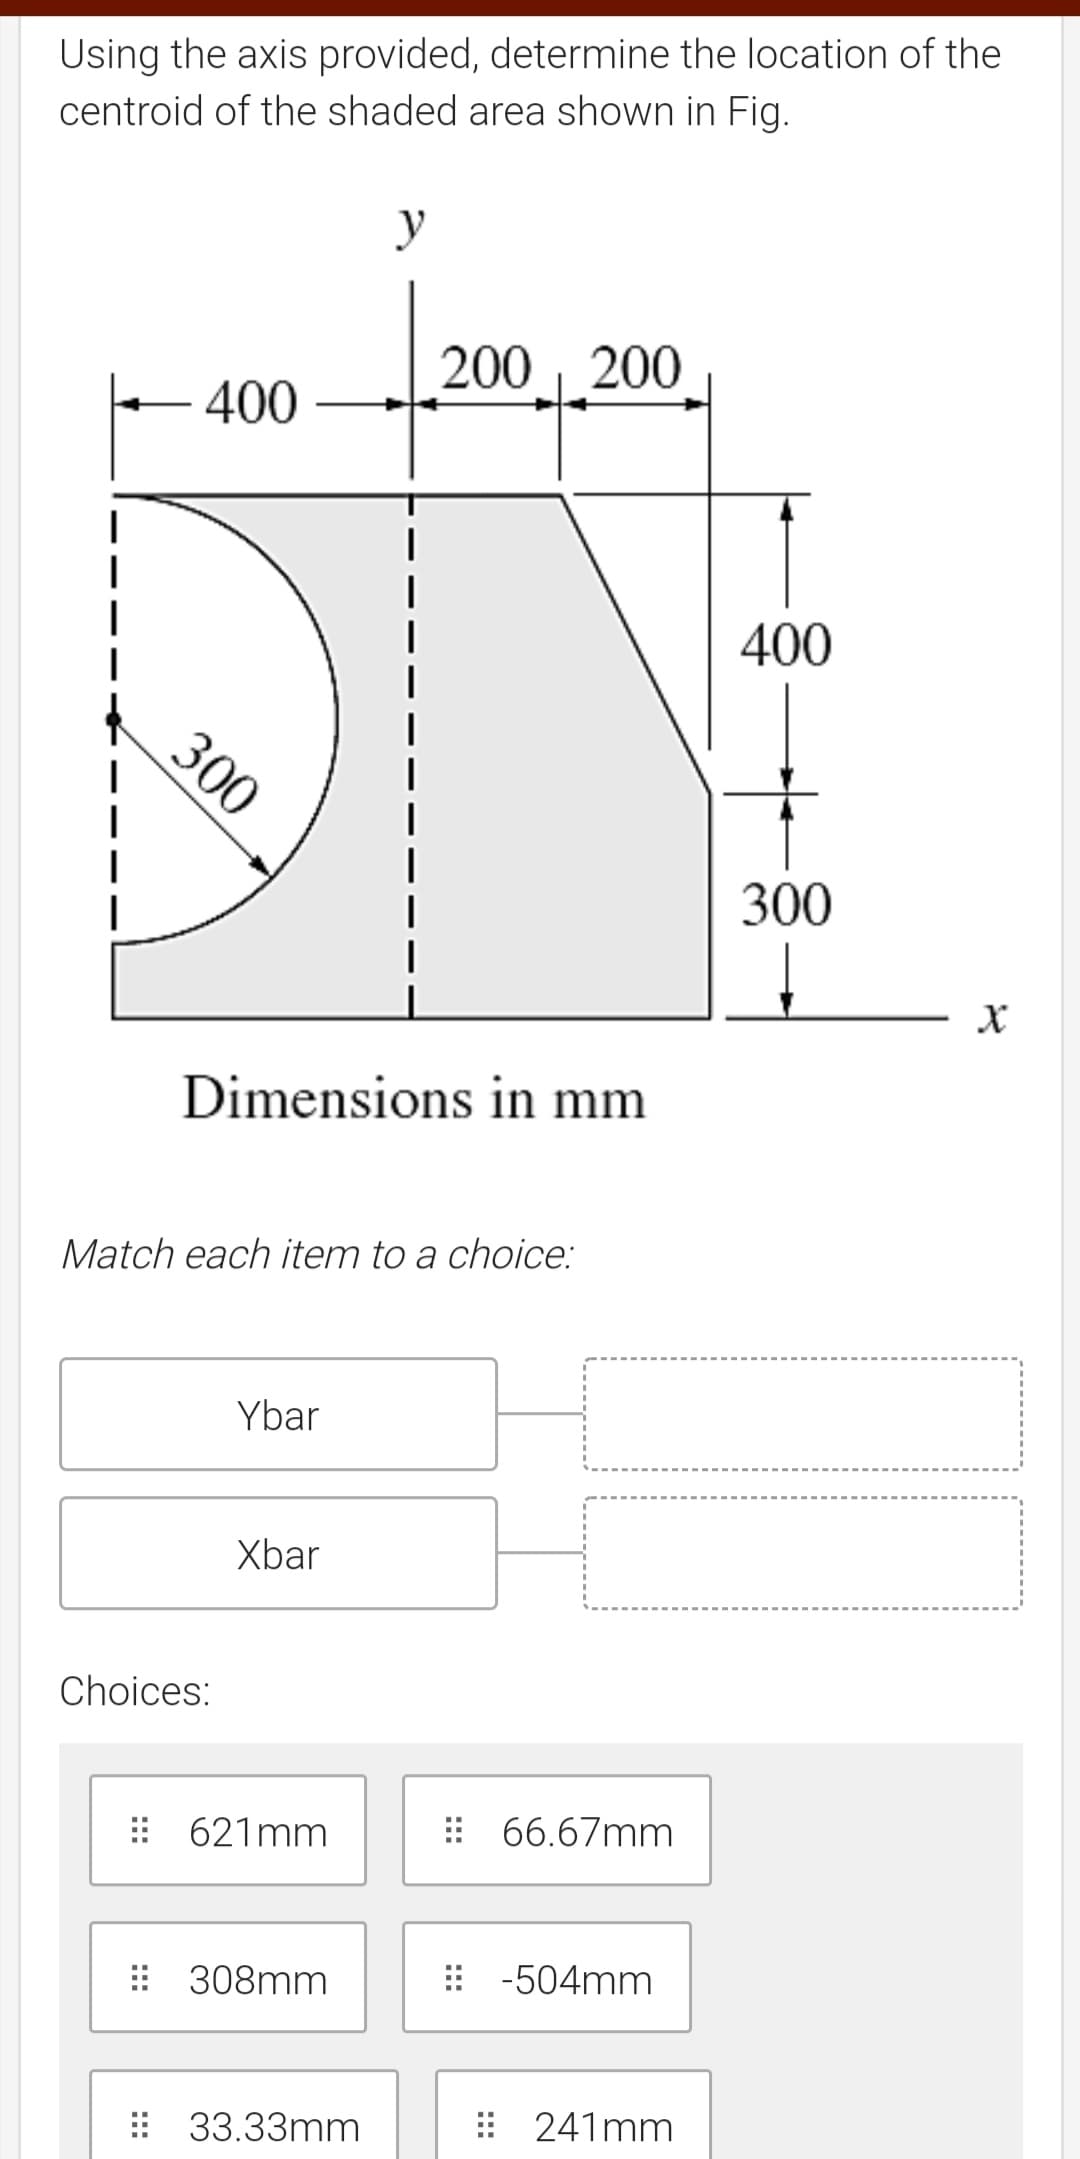 Using the axis provided, determine the location of the
centroid of the shaded area shown in Fig.
y
200 200
400
400
300
300
Dimensions in mm
Match each item to a choice:
Ybar
Xbar
Choices:
: 621mm
: 66.67mm
: 308mm
-504mm
: 33.33mm
: 241mm
